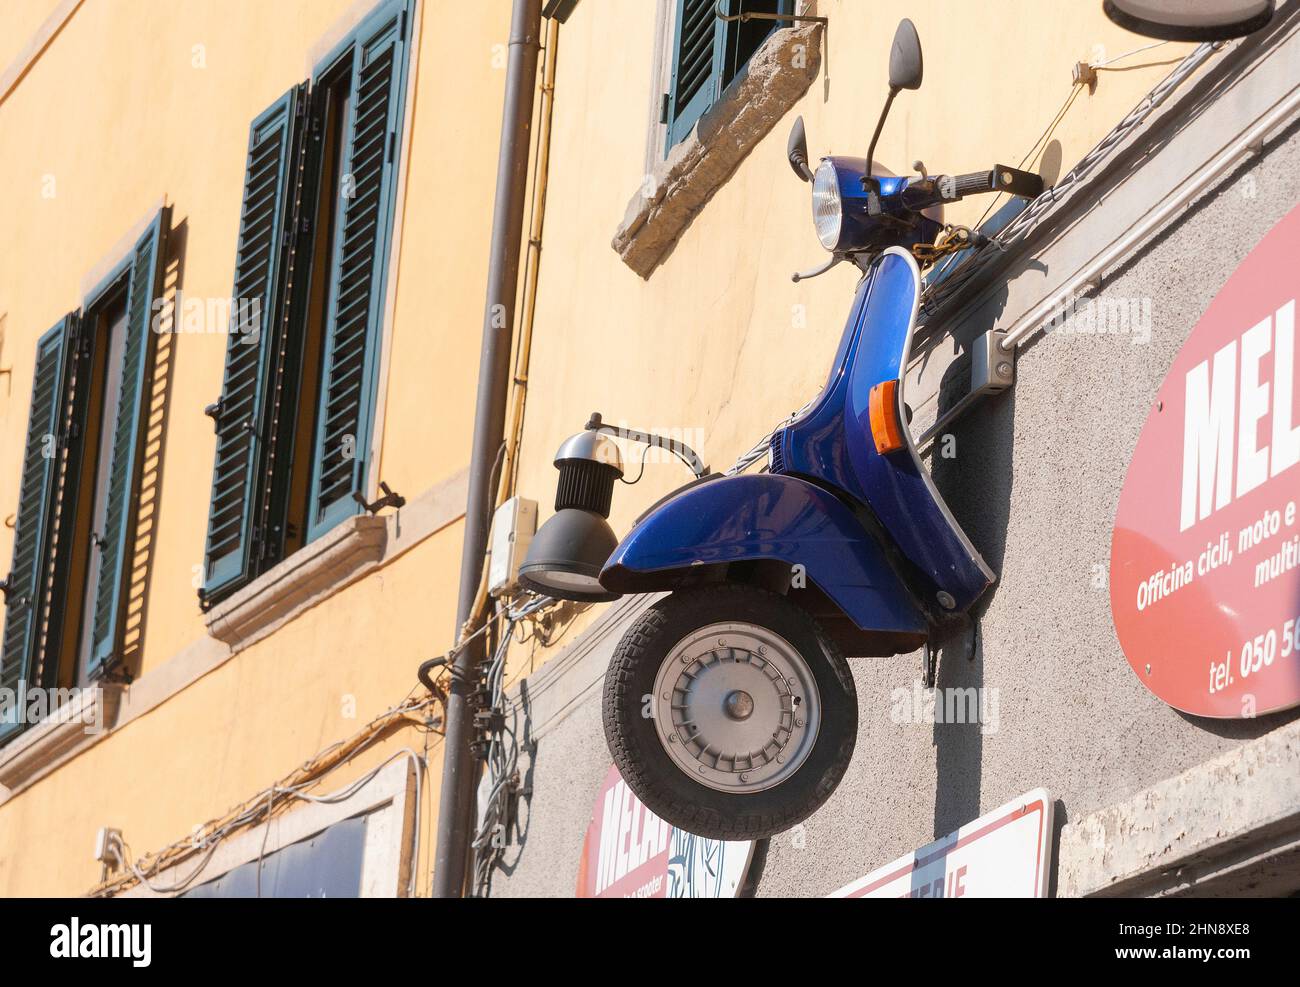 Pisa, Italy - March 29, 2021 - Vespa Piaggio cut in half and hung outside a workshop as a sign Stock Photo